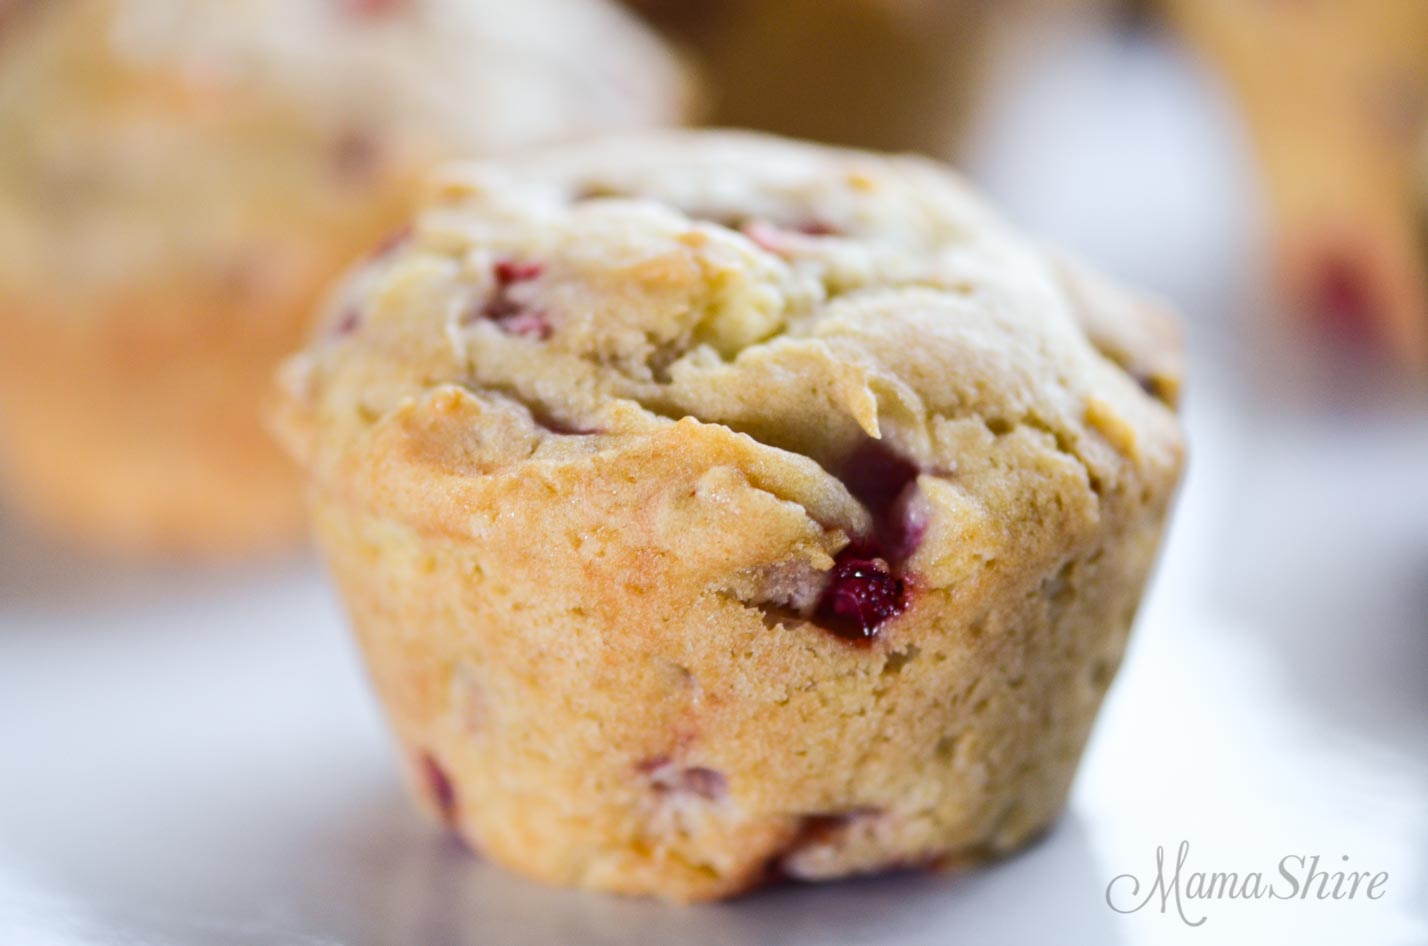 One strawberry muffin made with a gluten-free recipes.